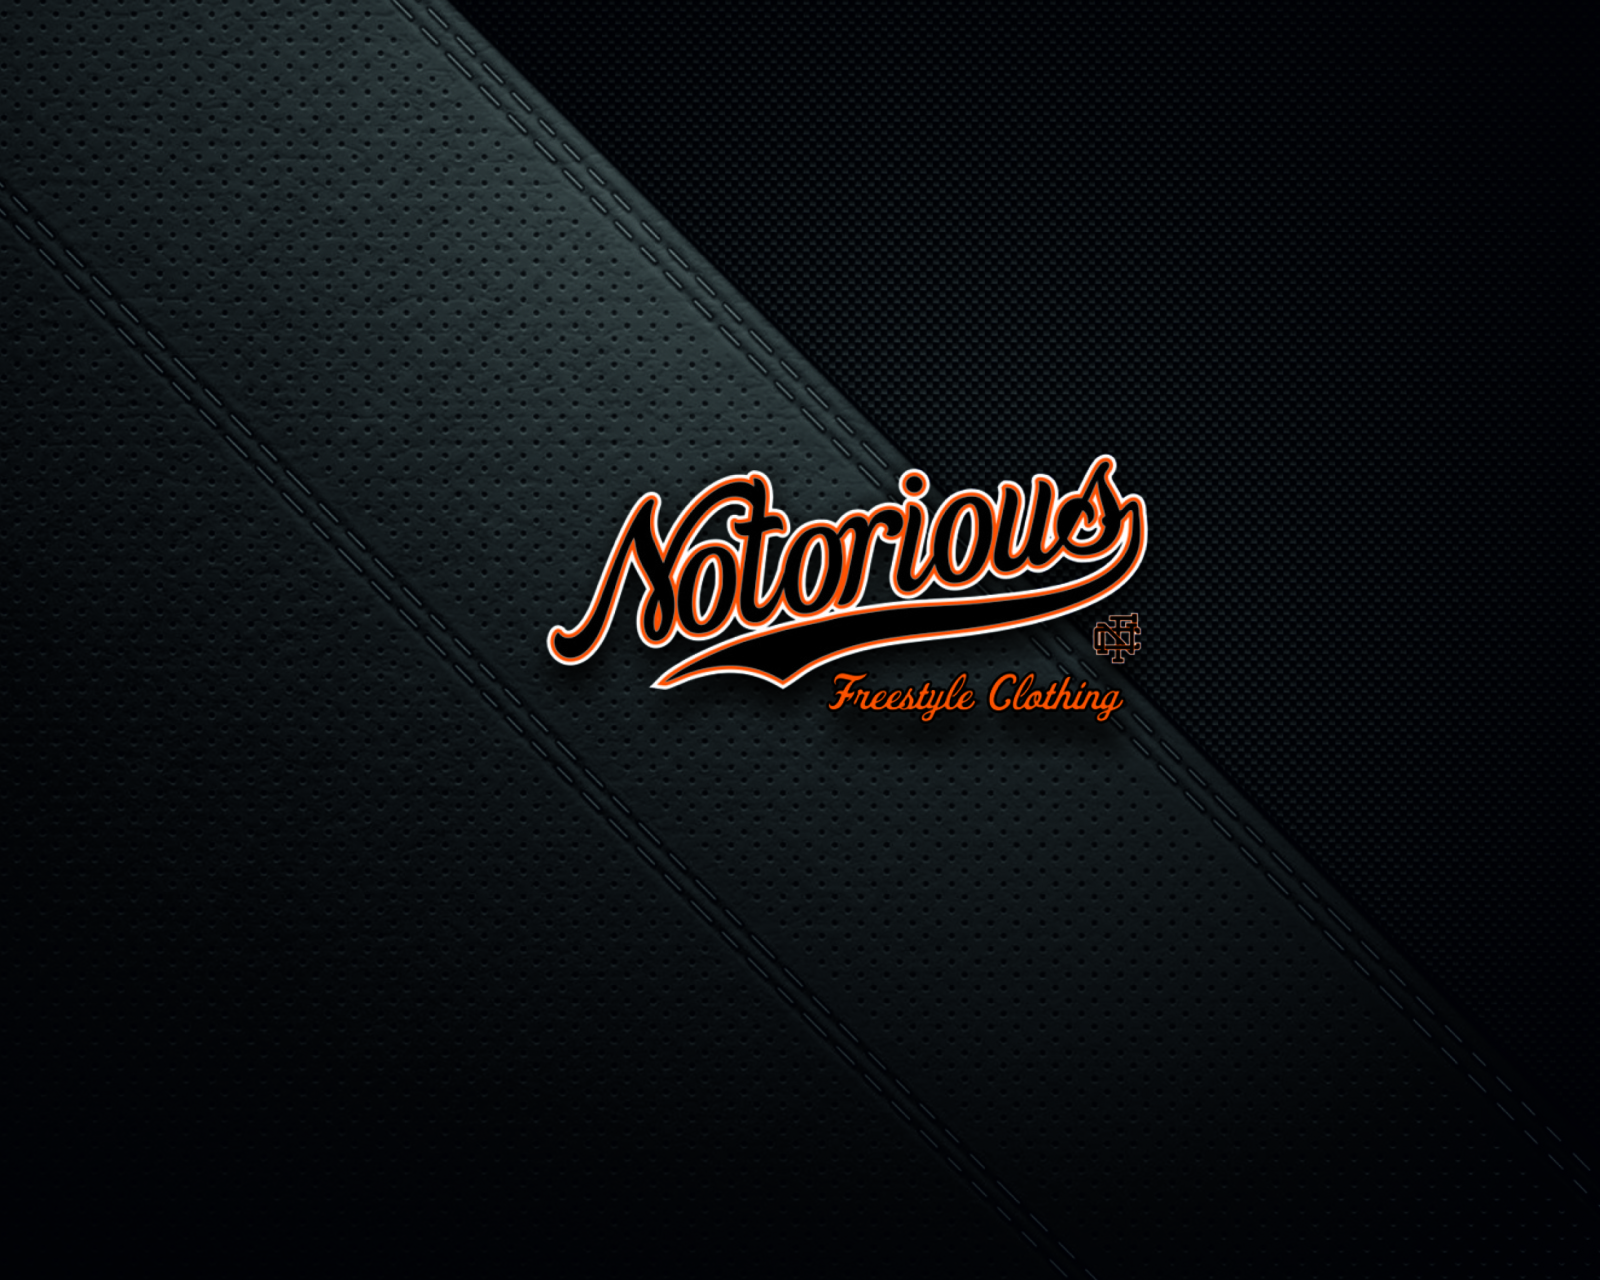 Notorious Freestyle Clothes screenshot #1 1600x1280